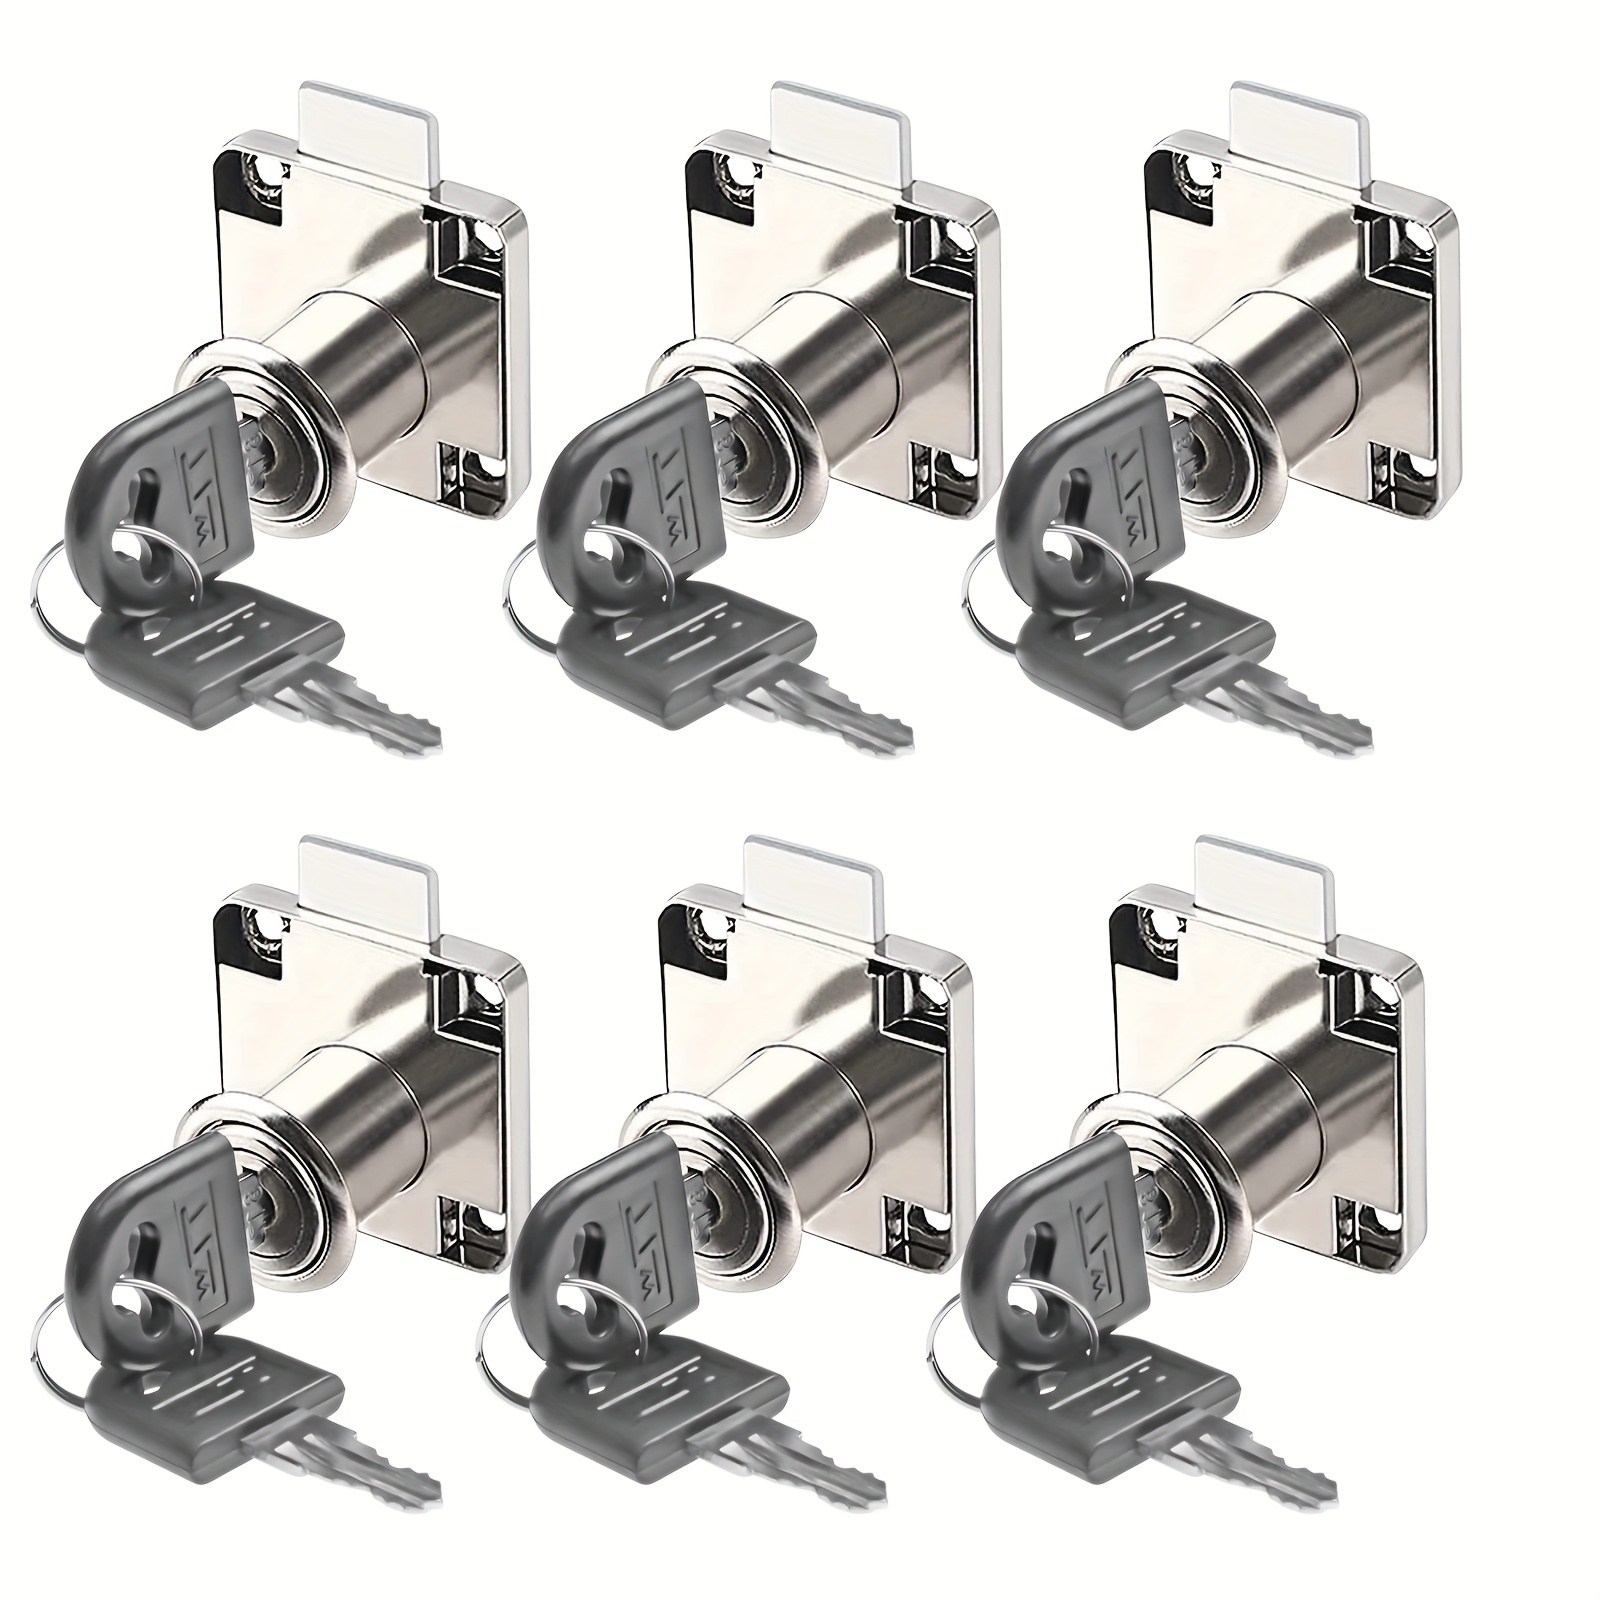 

6pcs Furniture Cabinet Locks With 12 Keys For Office, Home, Shopping Mall, Store Drawers, Wardrobes, Display Cabinets